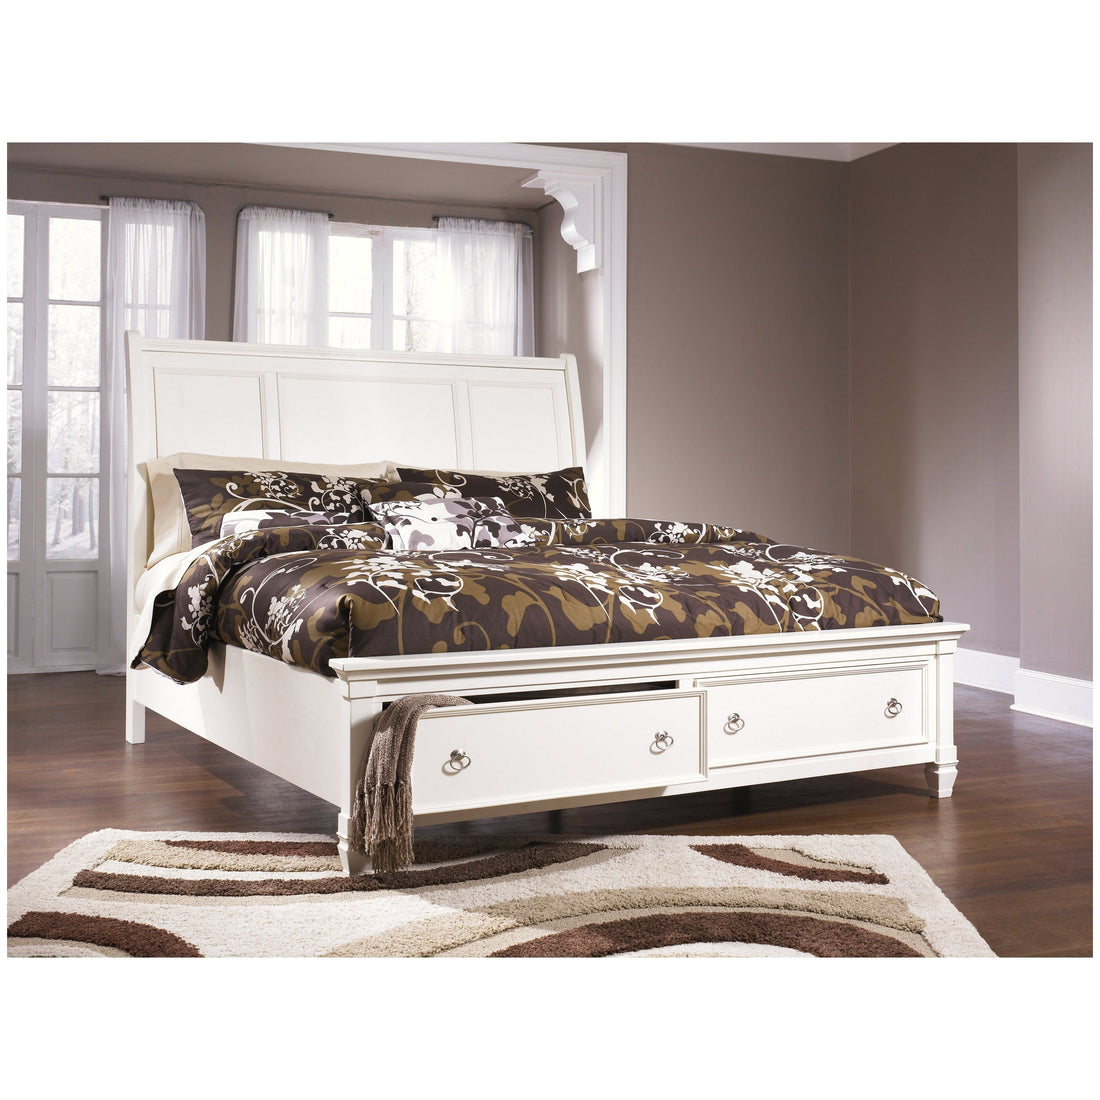 Prentice Sleigh Bed with 2 Storage Drawers